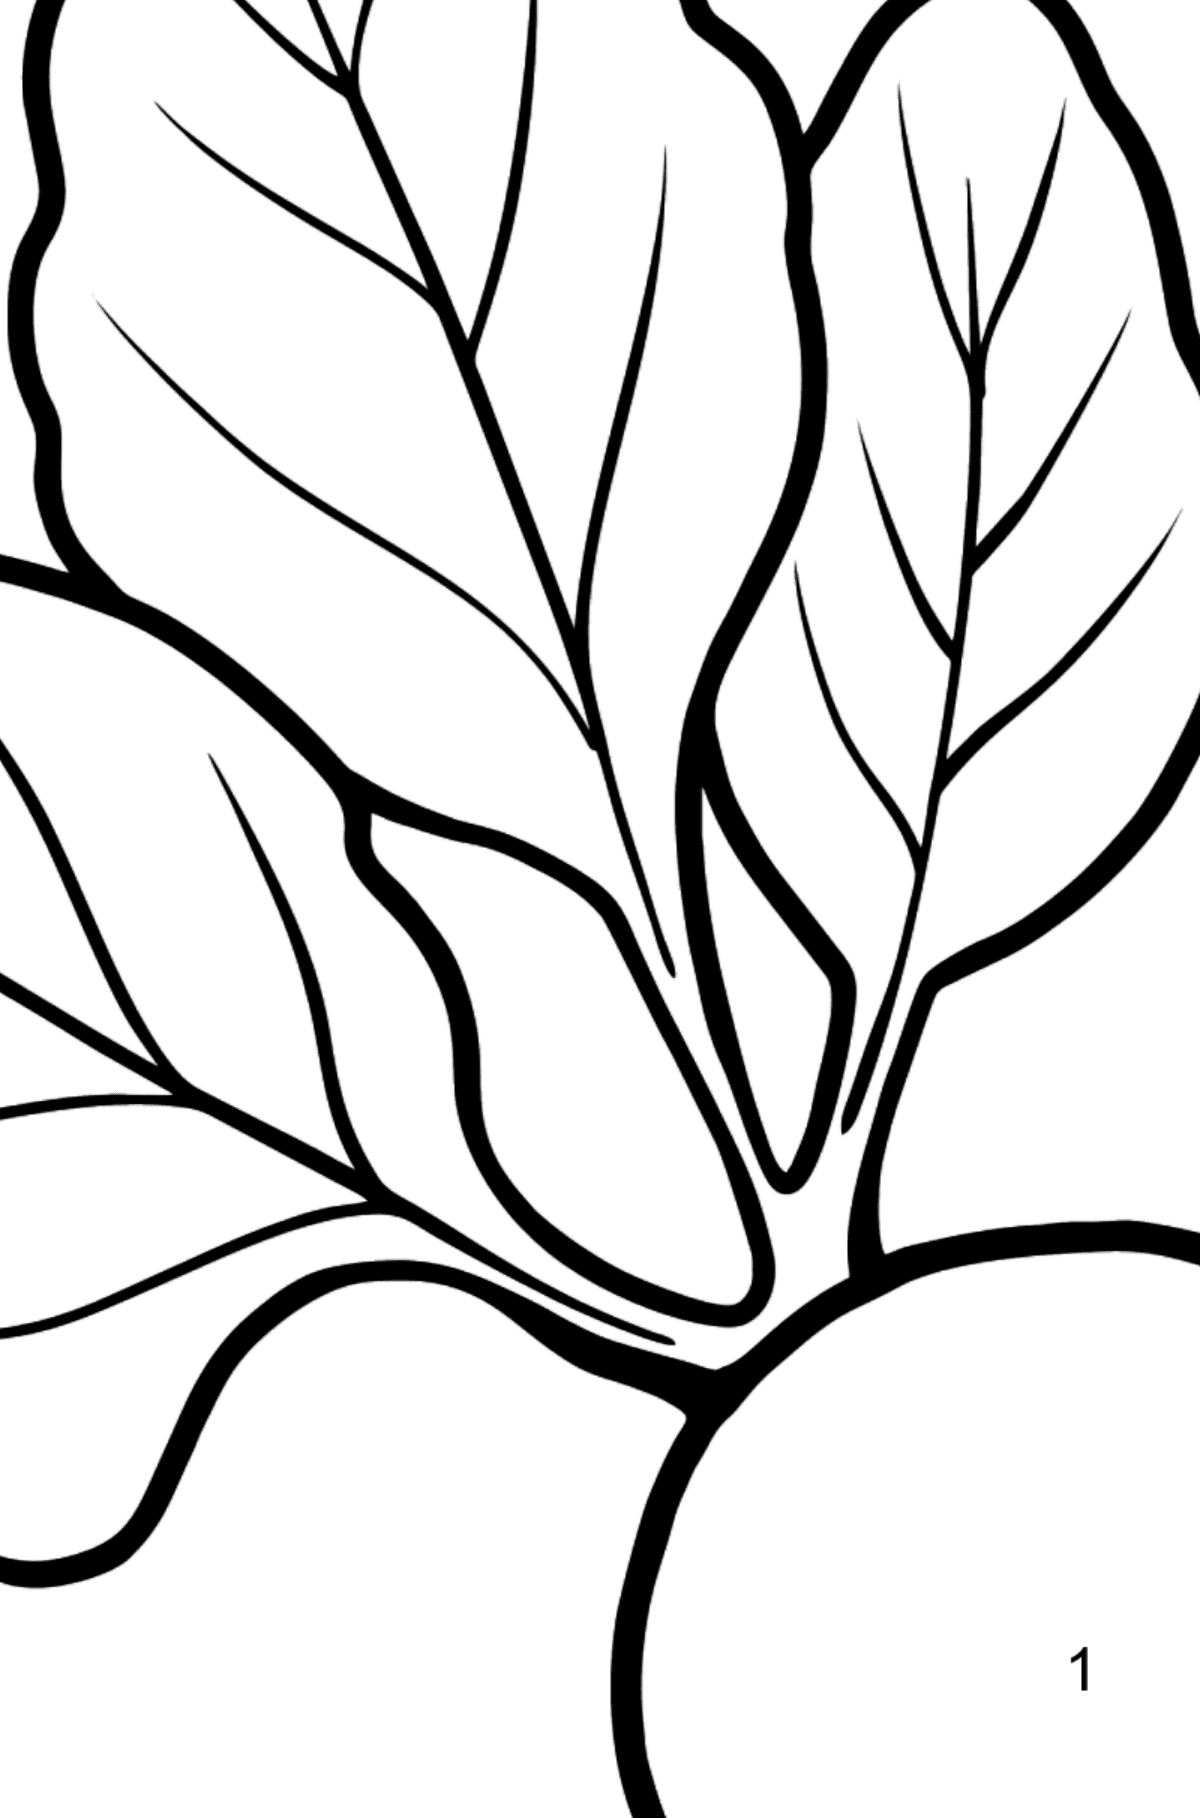 Beet coloring page - Coloring by Numbers for Kids